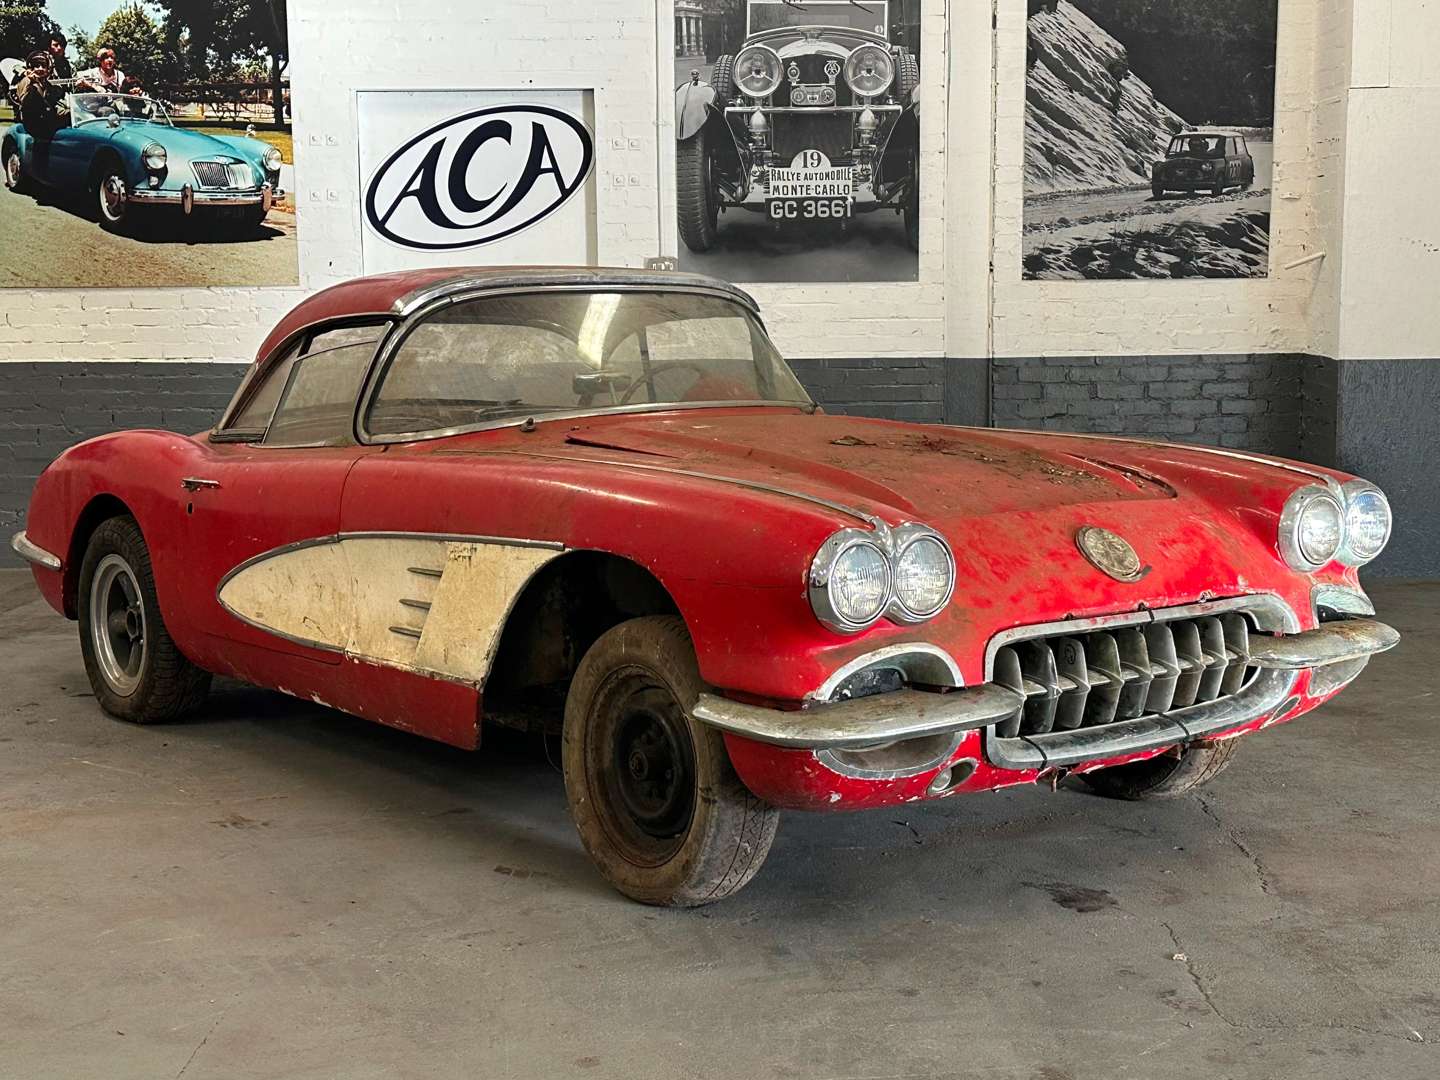 <p>1959 CHEVROLET CORVETTE C1 LHD From the Scottish collection</p>